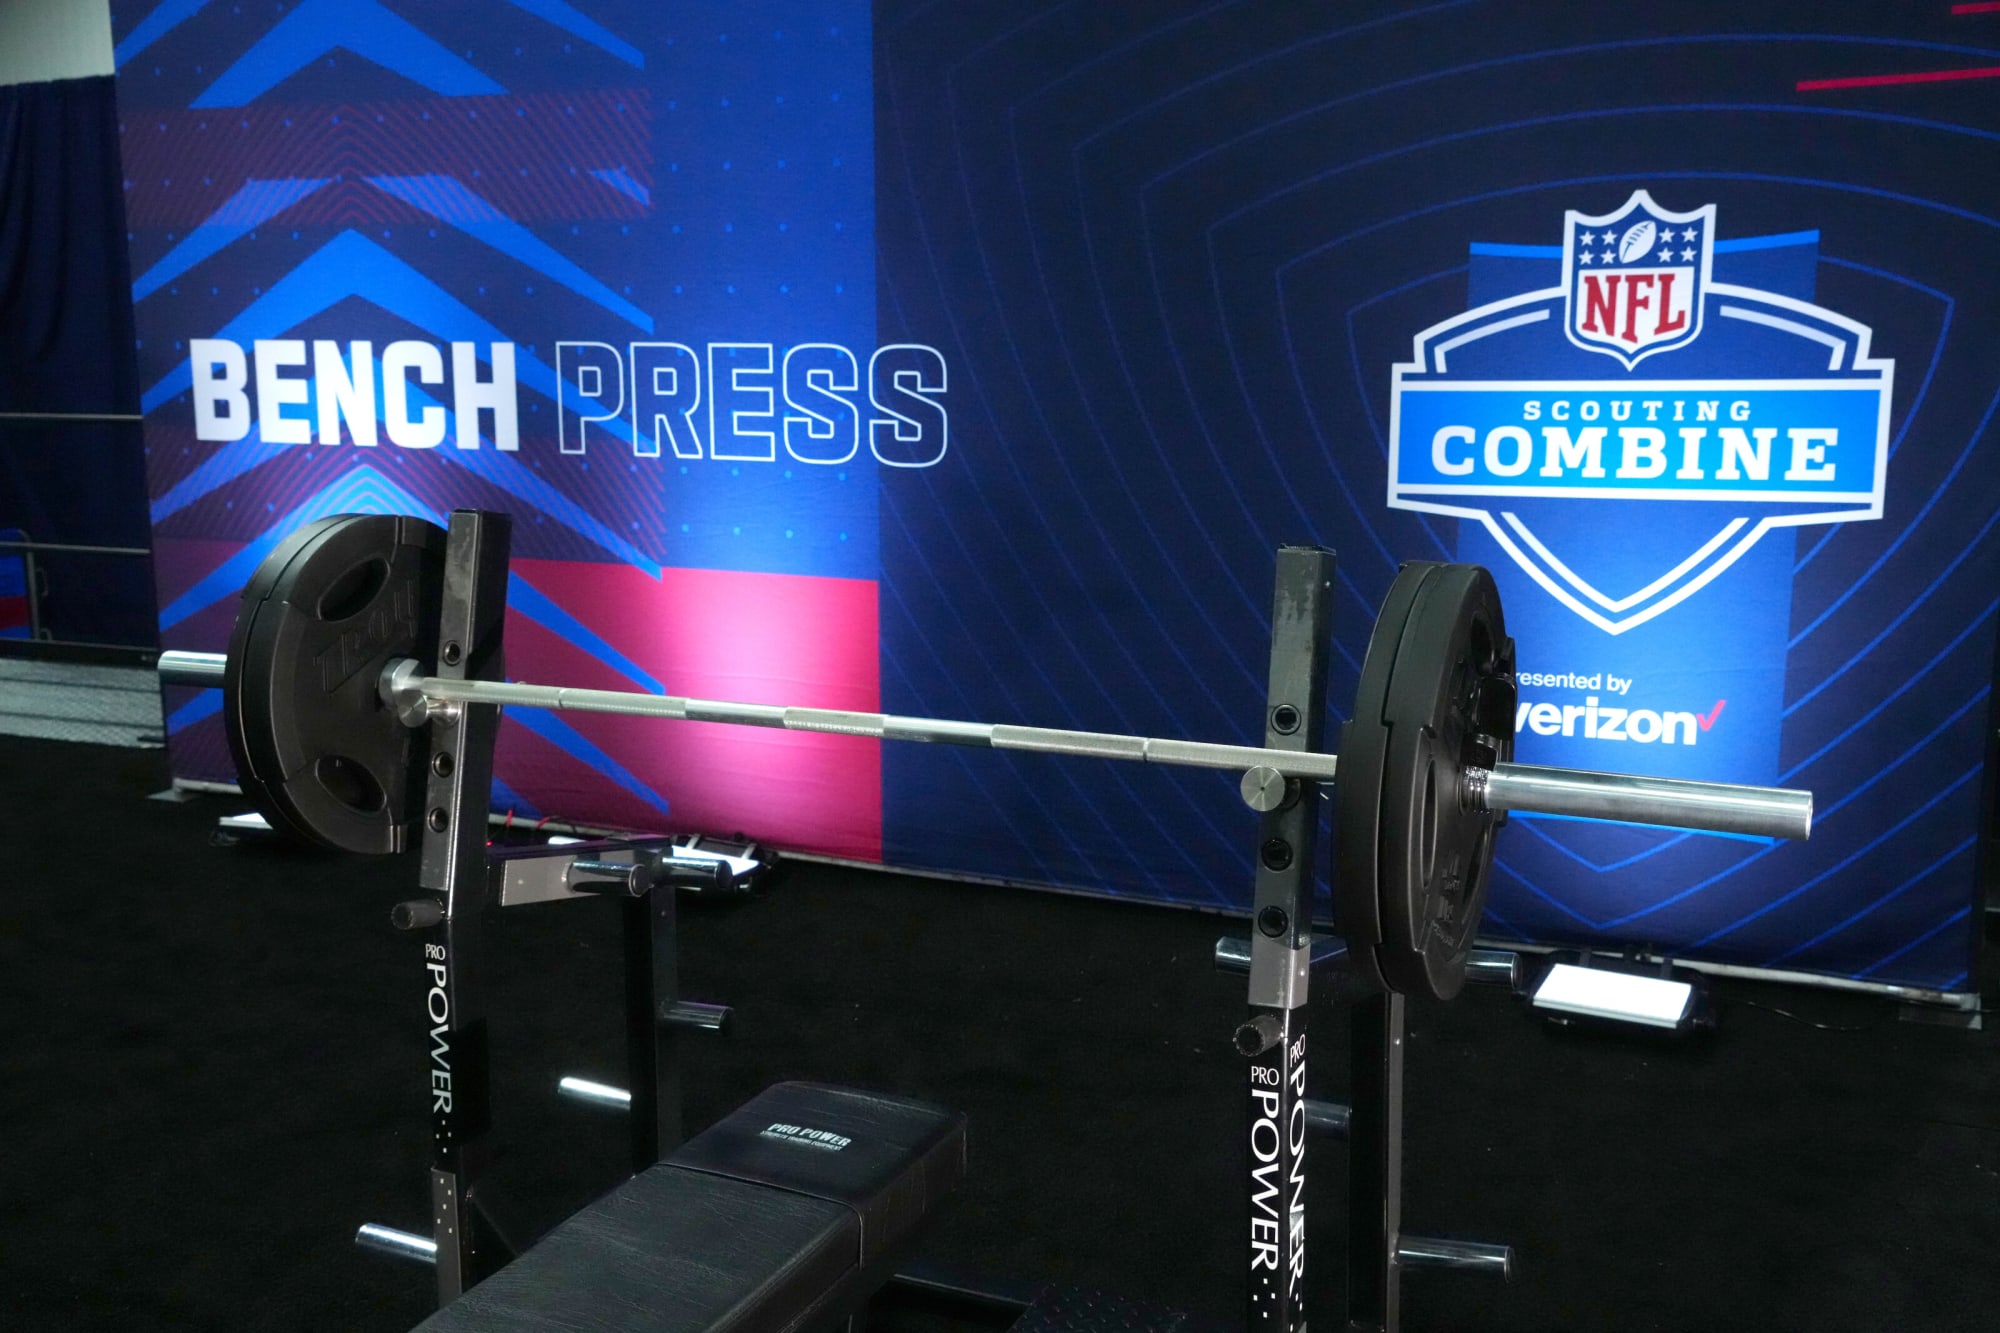 Best NFL Combine Bench Press records in history